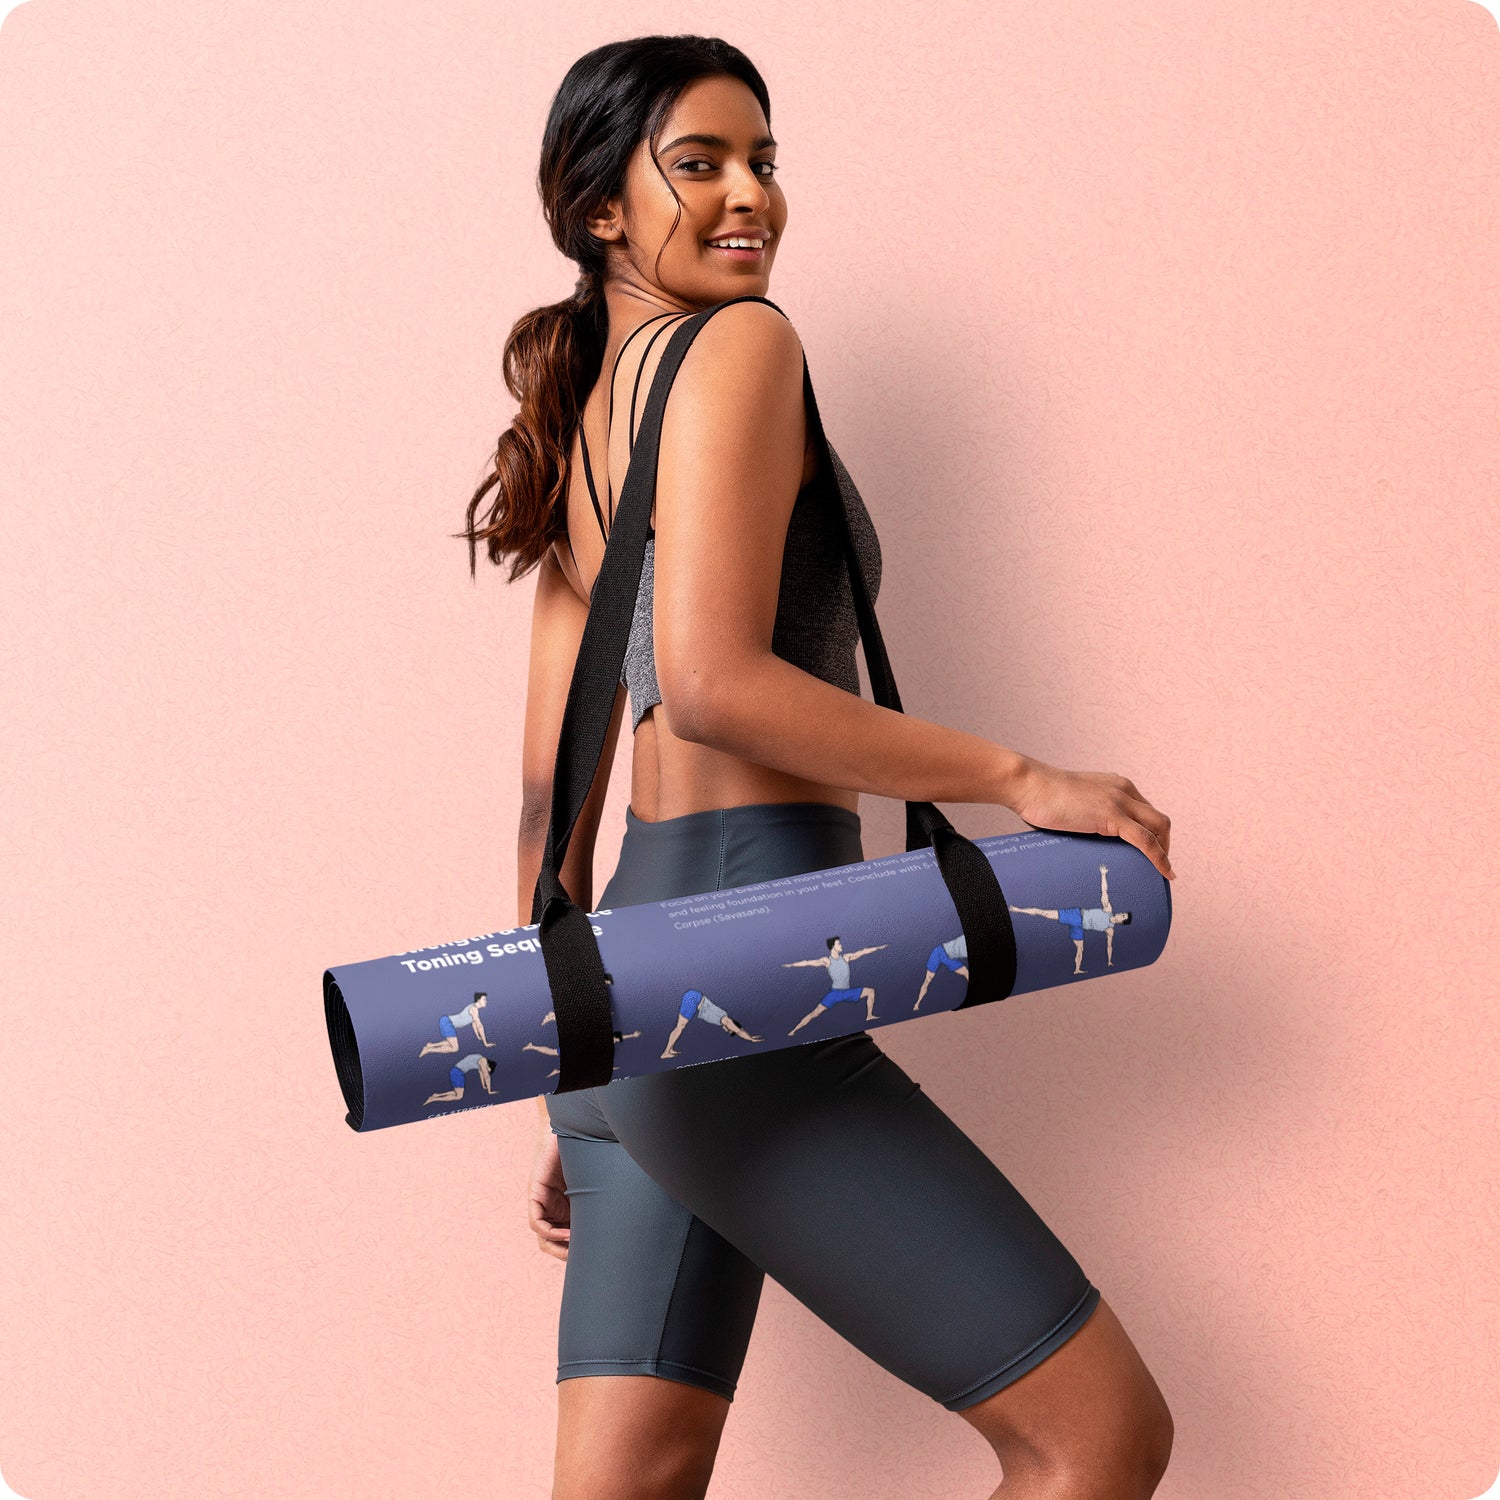 Instructional Yoga Mat with Poses Printed On It & Carrying Strap - 75  Illustrated Yoga Poses & 75 Stretches - Cute Yoga Mat For Women and Men -  Non-Slip, 1/4 Extra-Thick Yoga